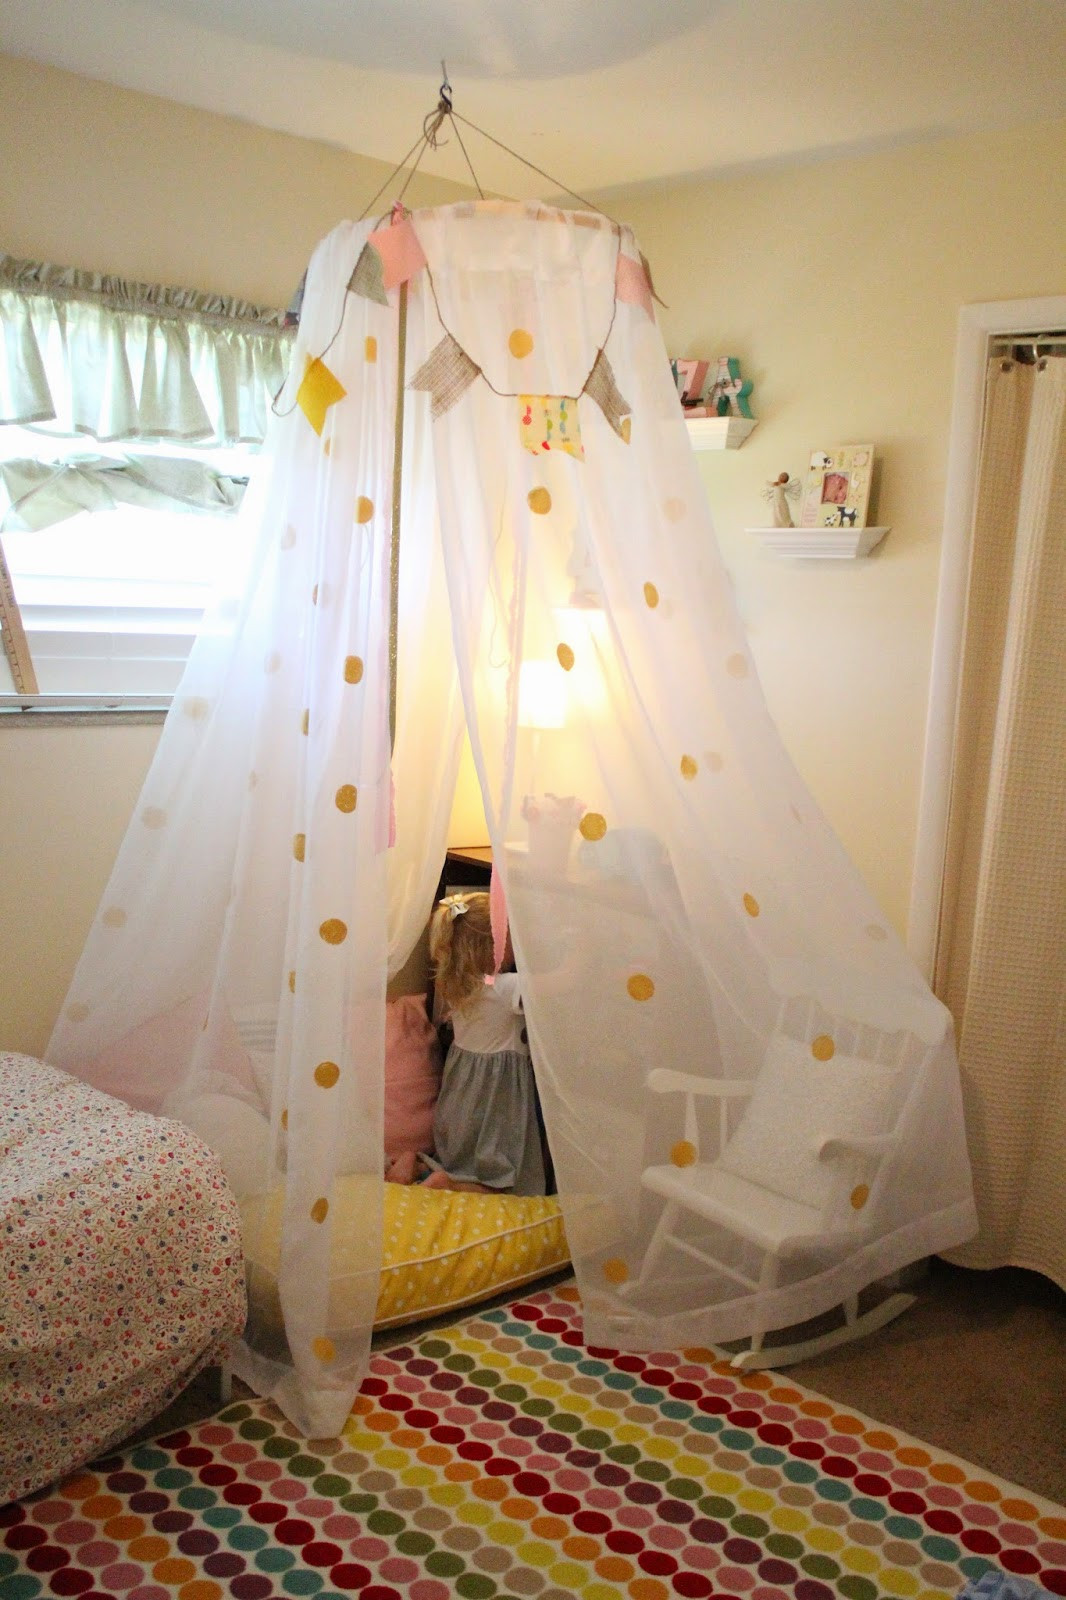 Toddler Bed Canopy DIY
 Mommy Vignettes DIY No Sew Tent Canopy Tutorial